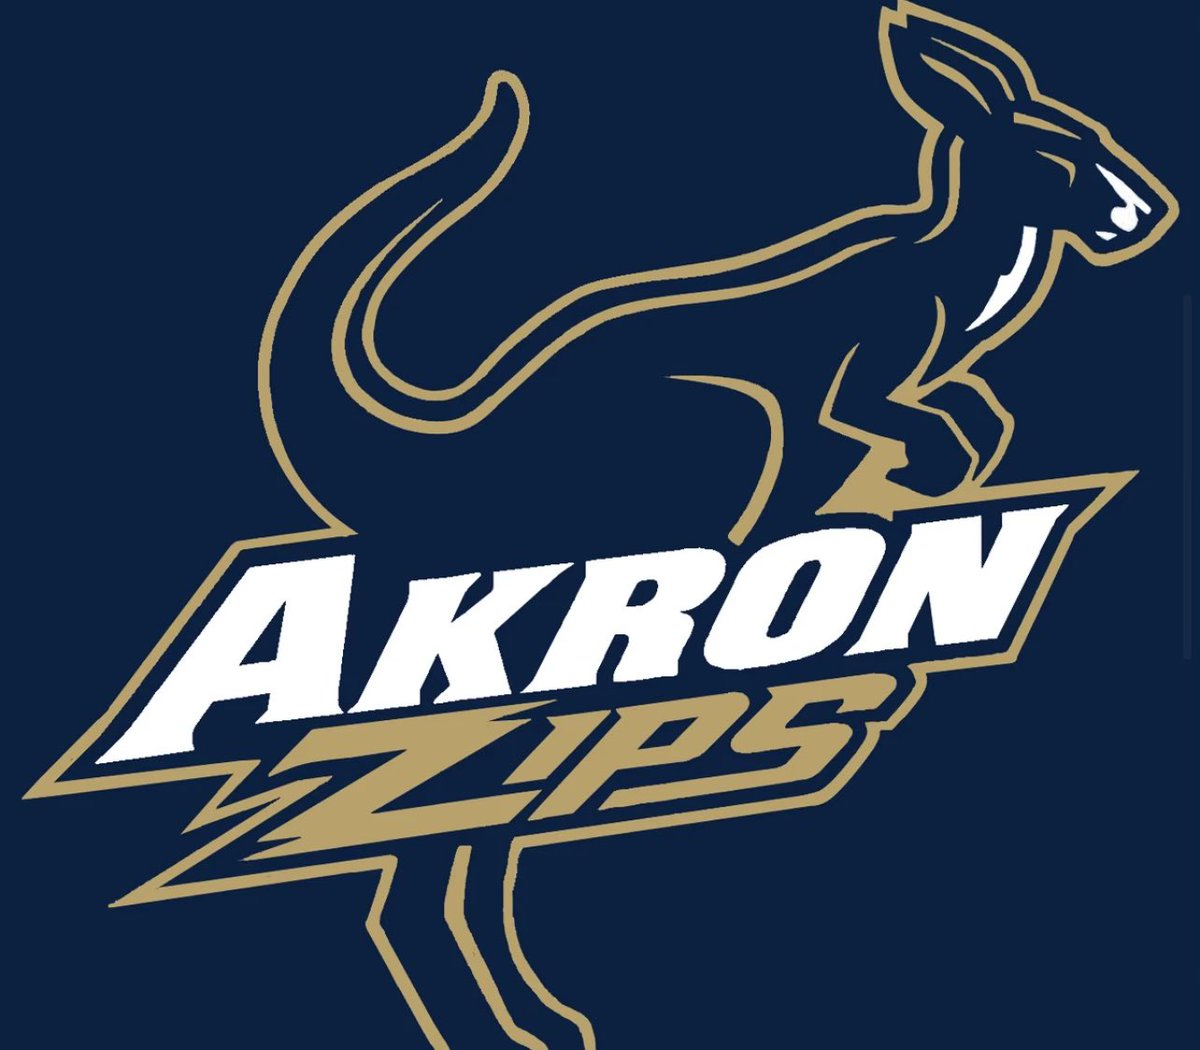 After a great conversation with @Coach_J_Rod I am blessed to receive a PWO to the university of Akron!!! Thank you for the opportunity